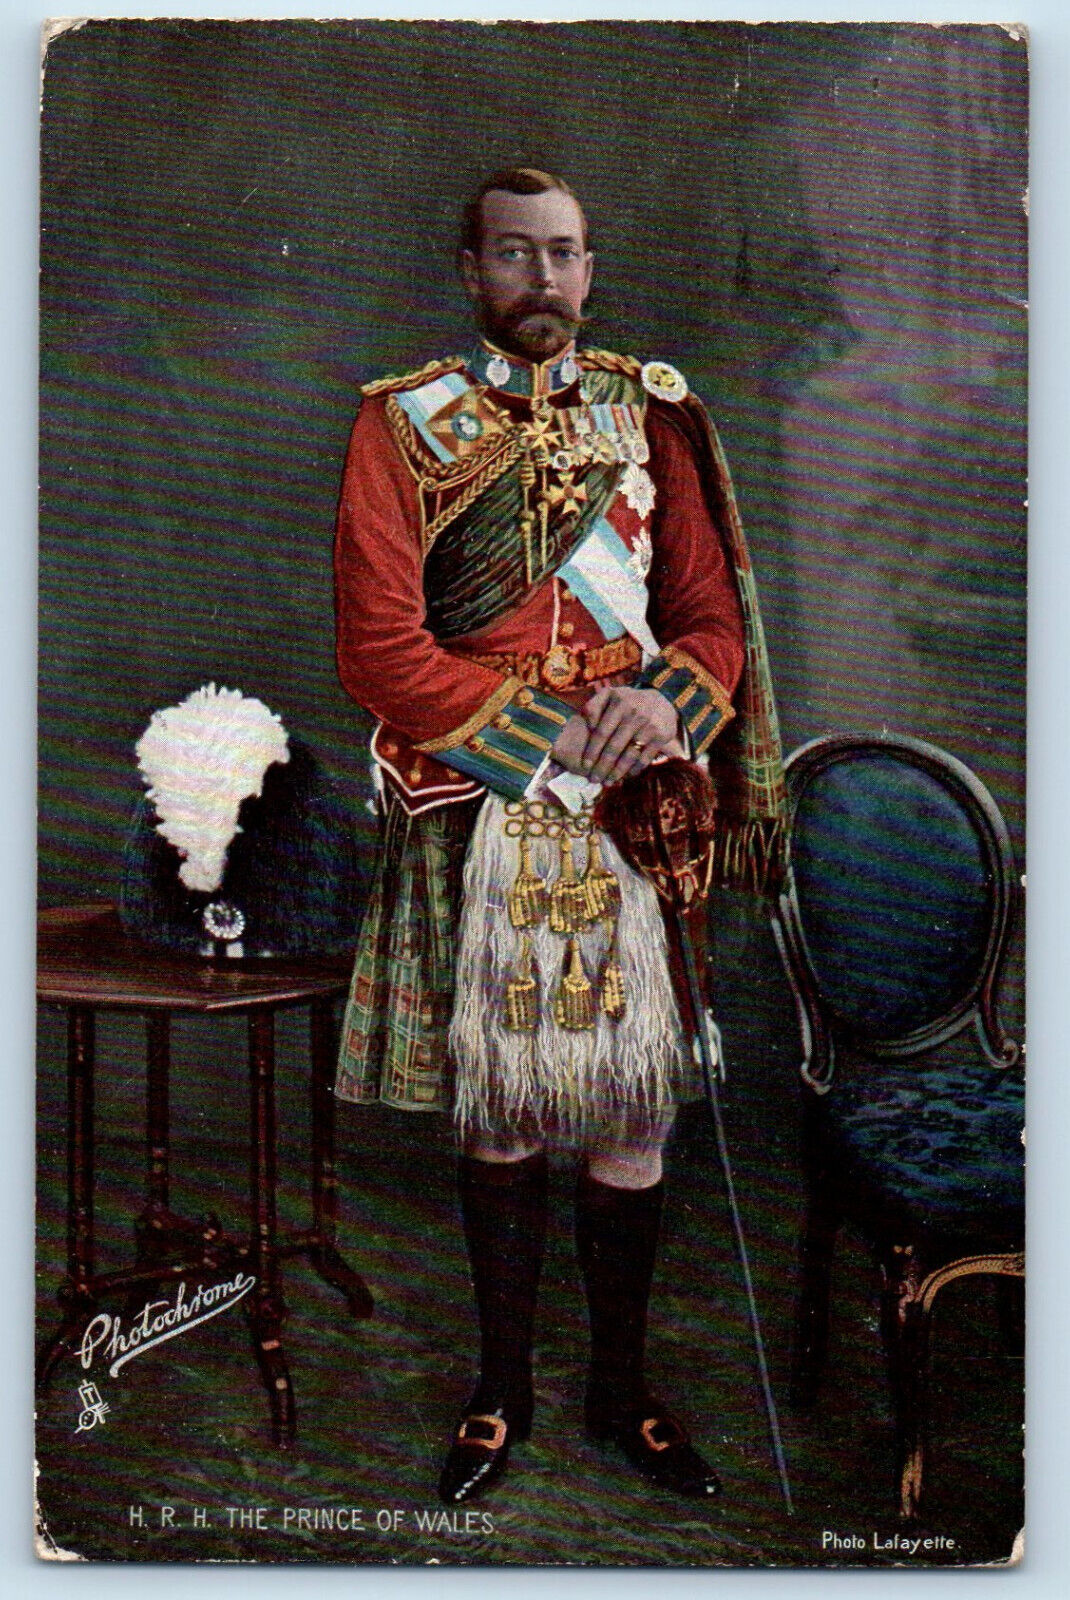 Wales Postcard H.R.H The Prince of Wales 1907 Photochrome Tuck Art Posted